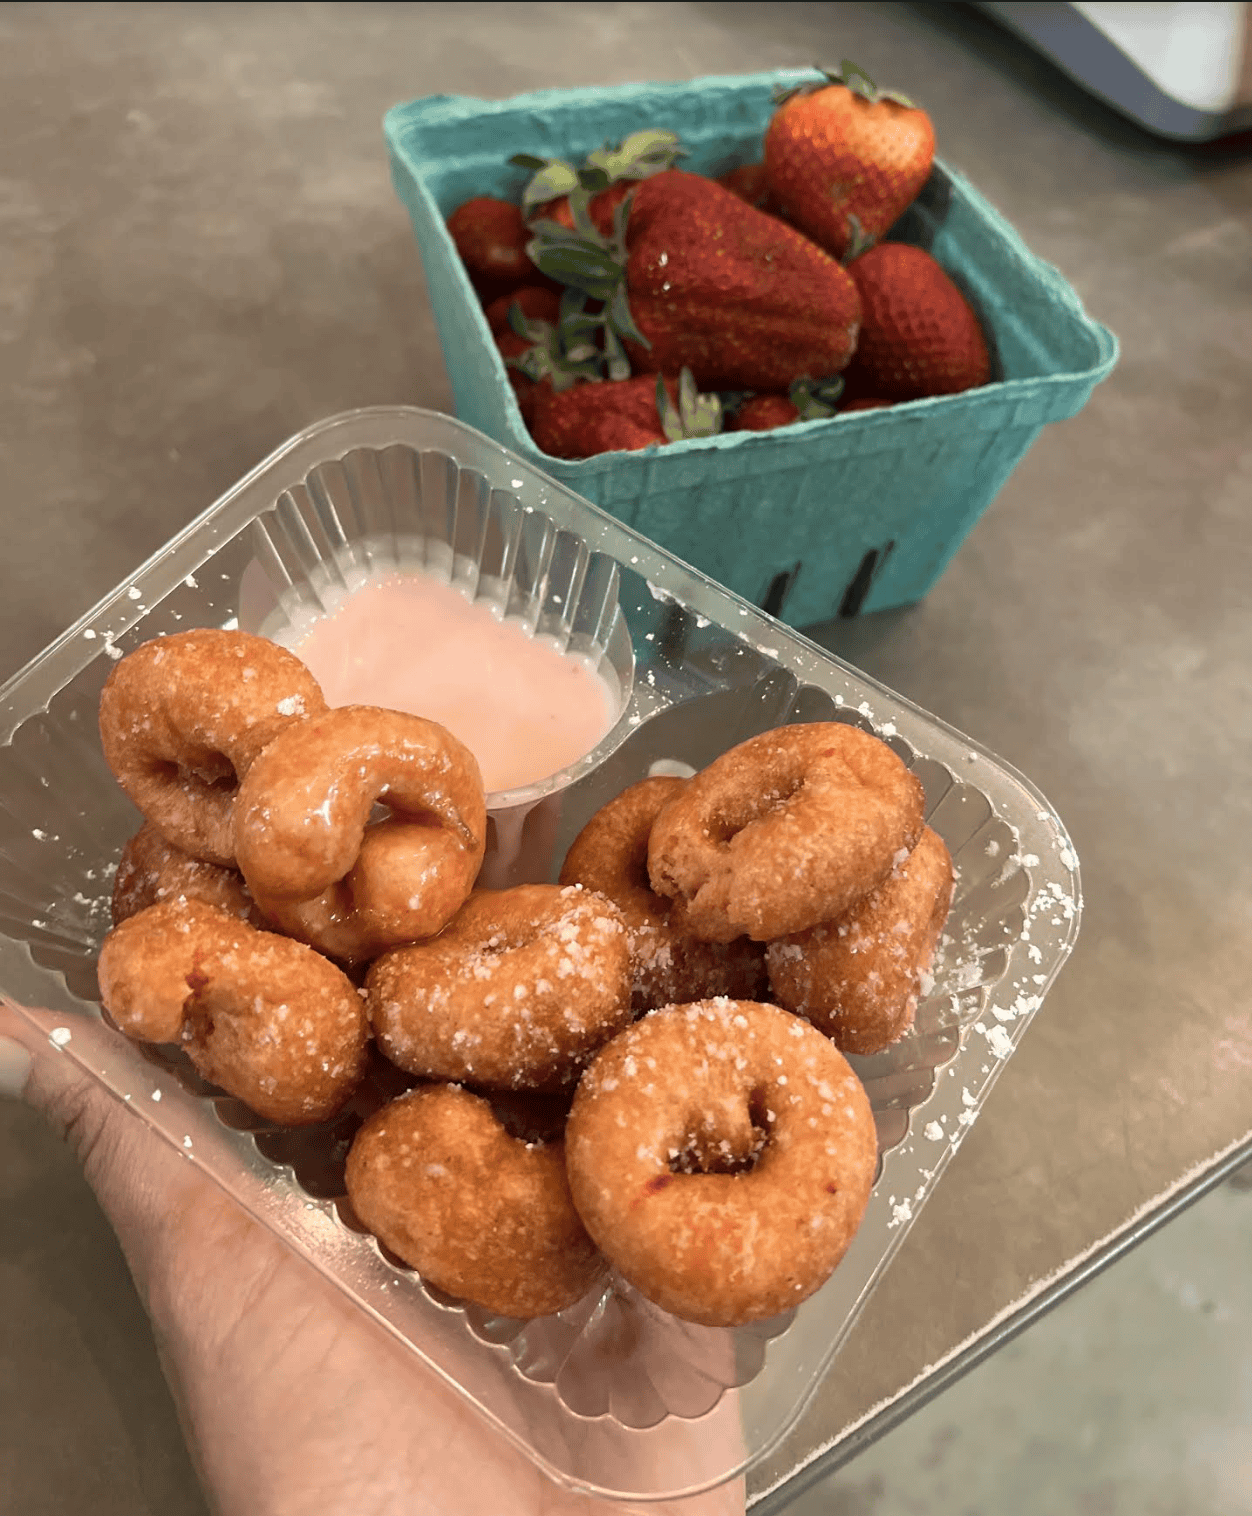 Millstone Creek Orchards Strawberry donuts